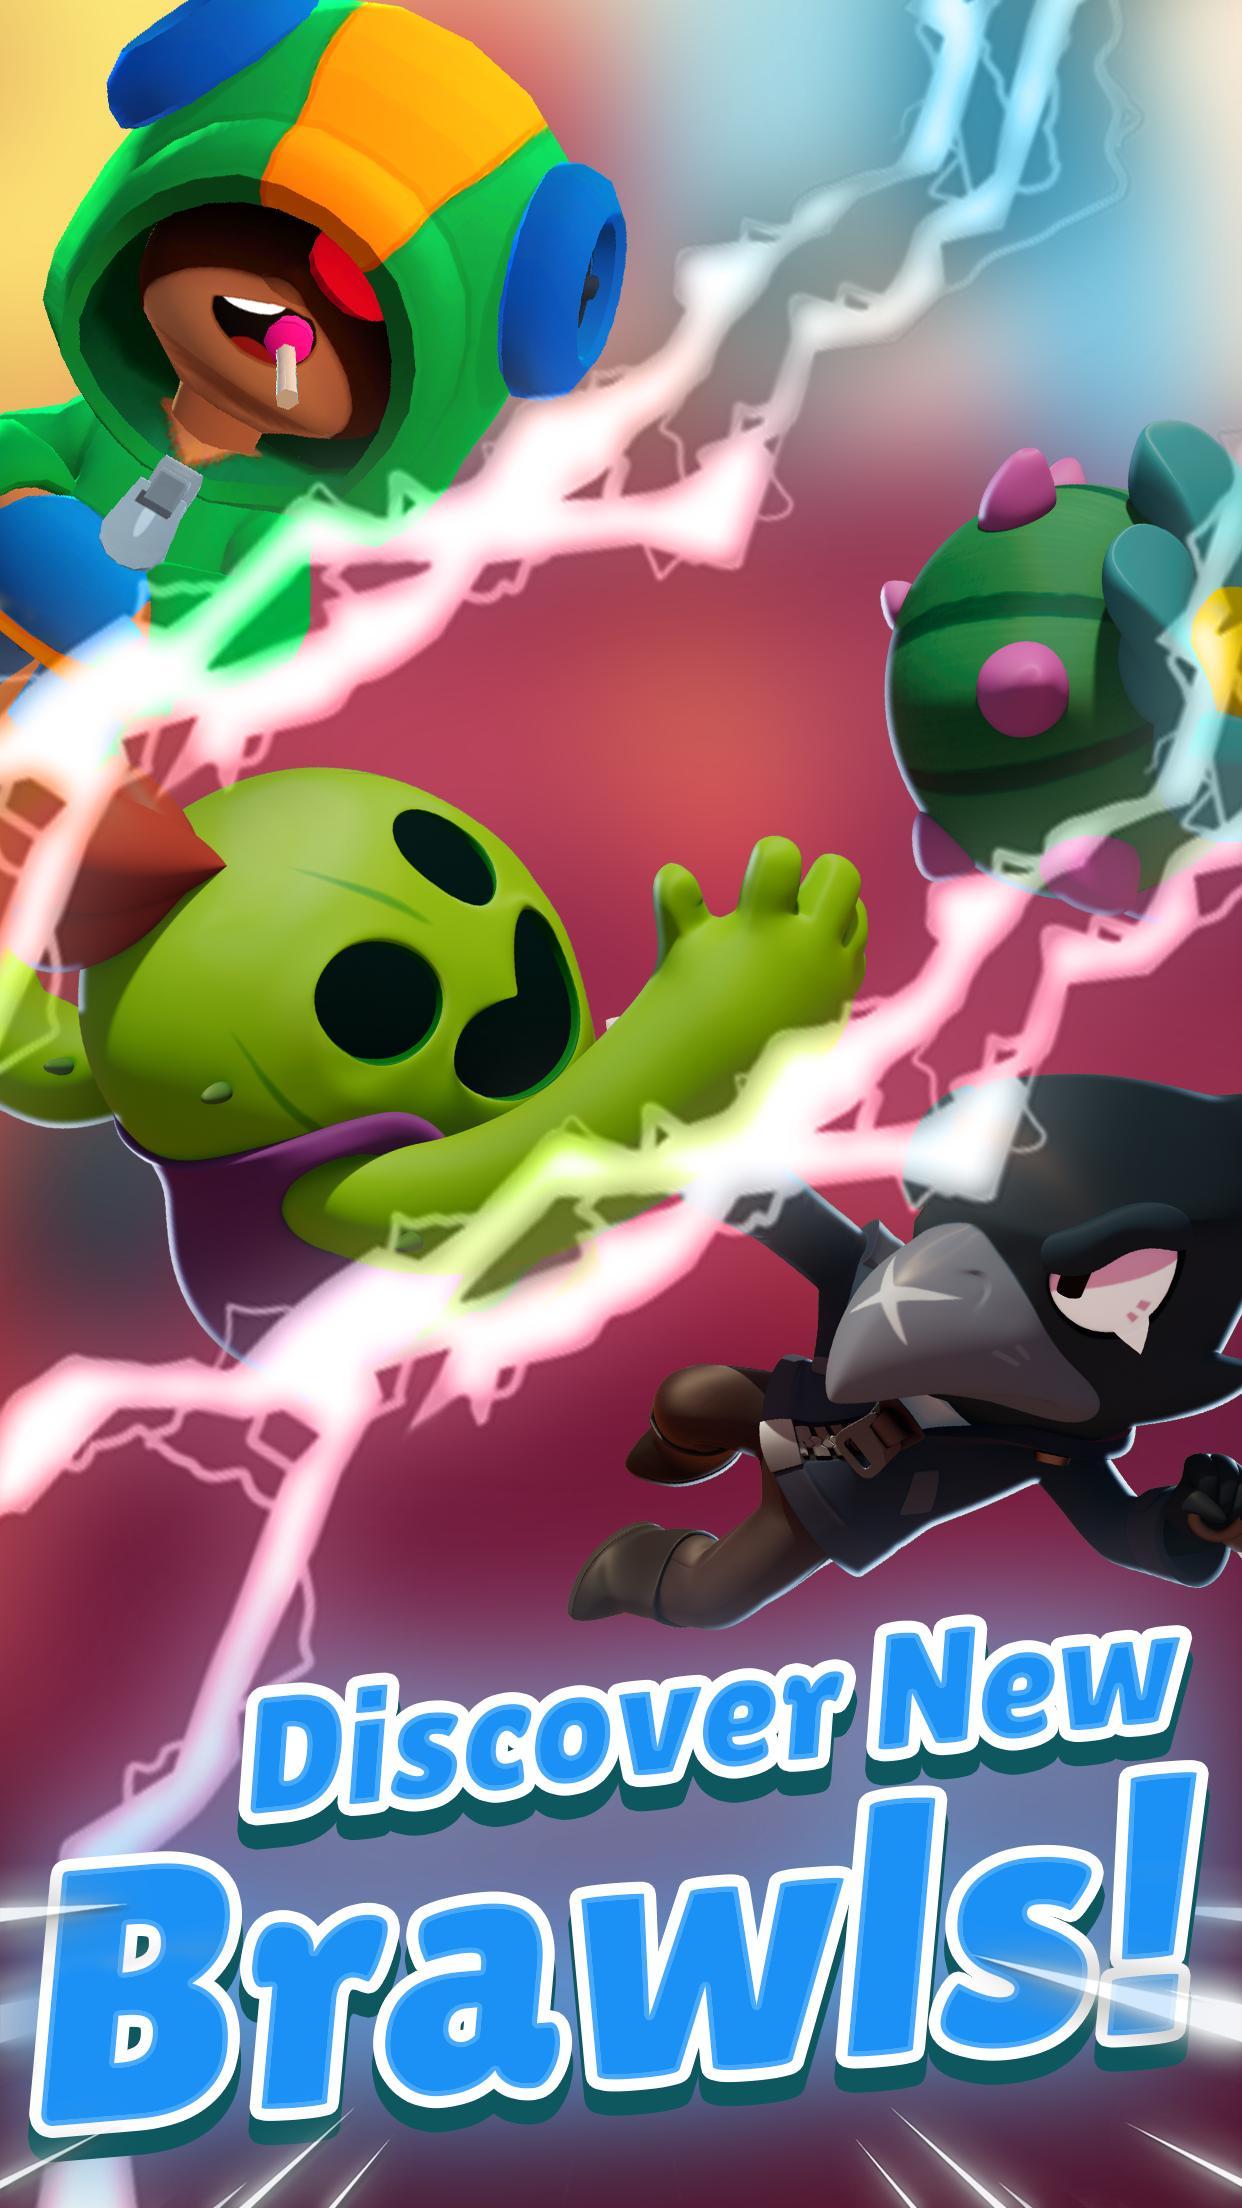 Bs Wallpaper A Free Hd Wallpapers For Brawl Star For Android Apk Download - brawl stars poster hd quality